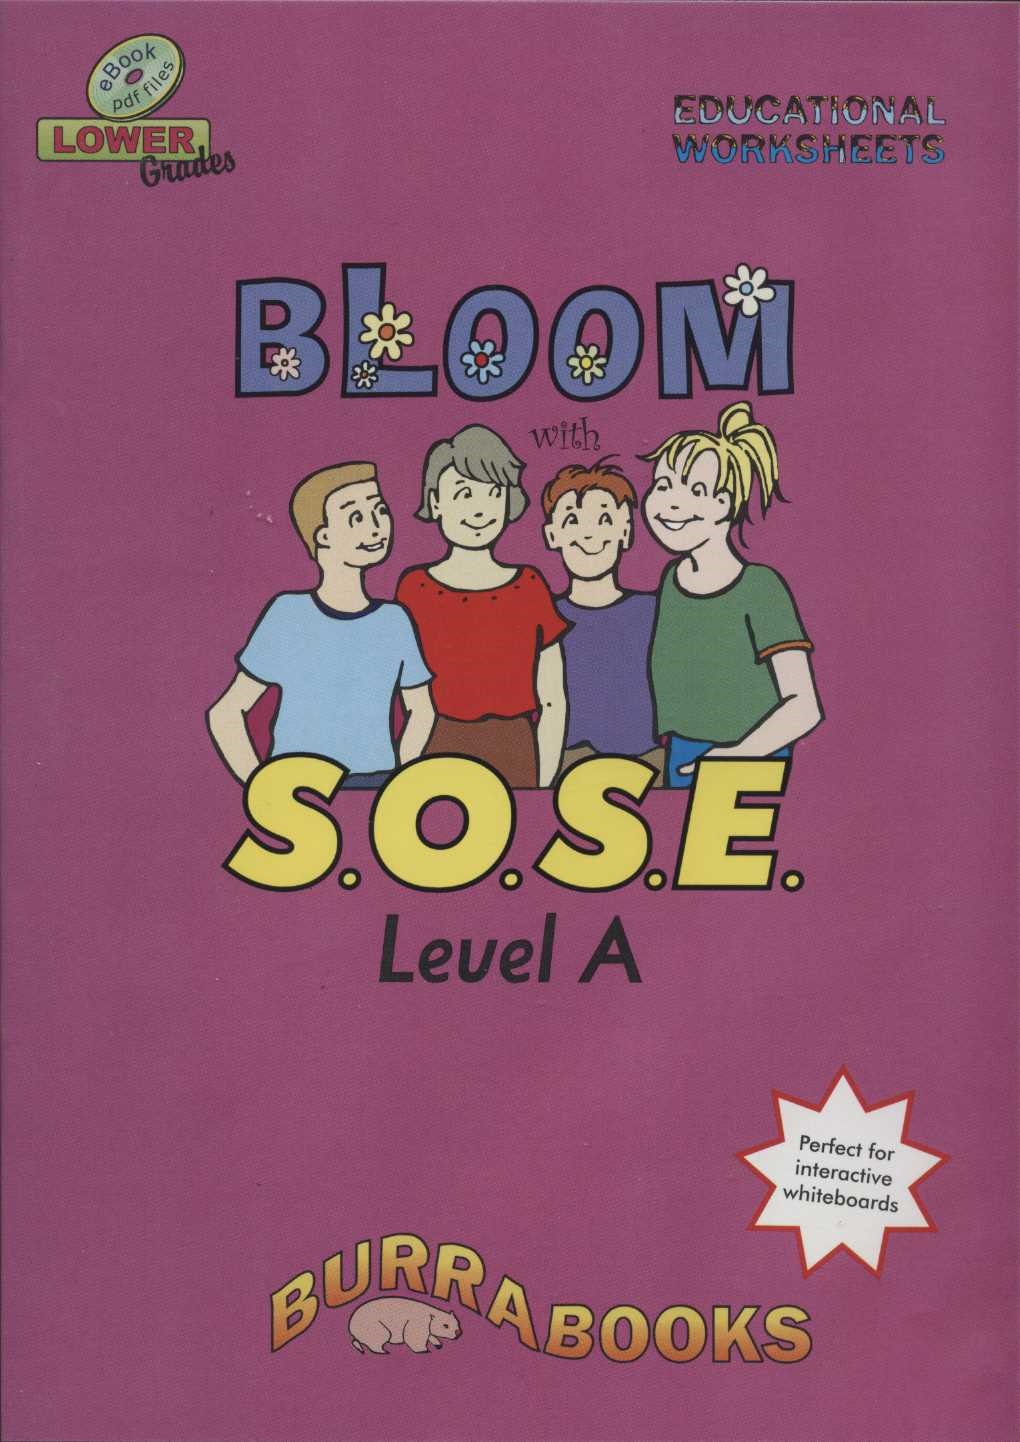 Bloom with S.O.S.E Level A - Downloadable book